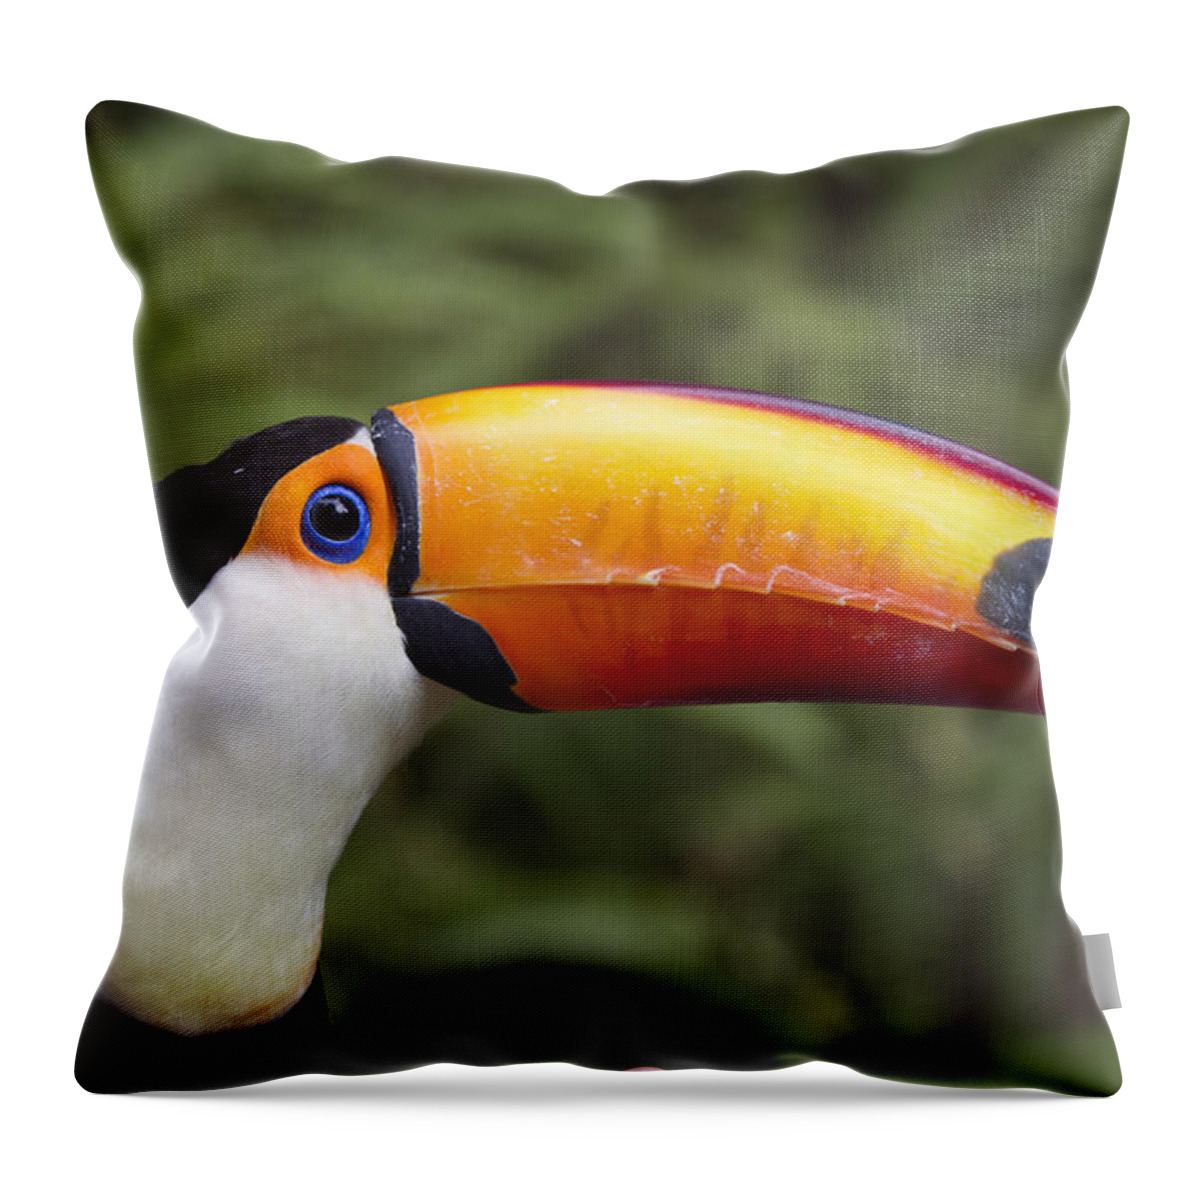 Mp Throw Pillow featuring the photograph Toco Toucan Ramphastos Toco, Native by Zssd